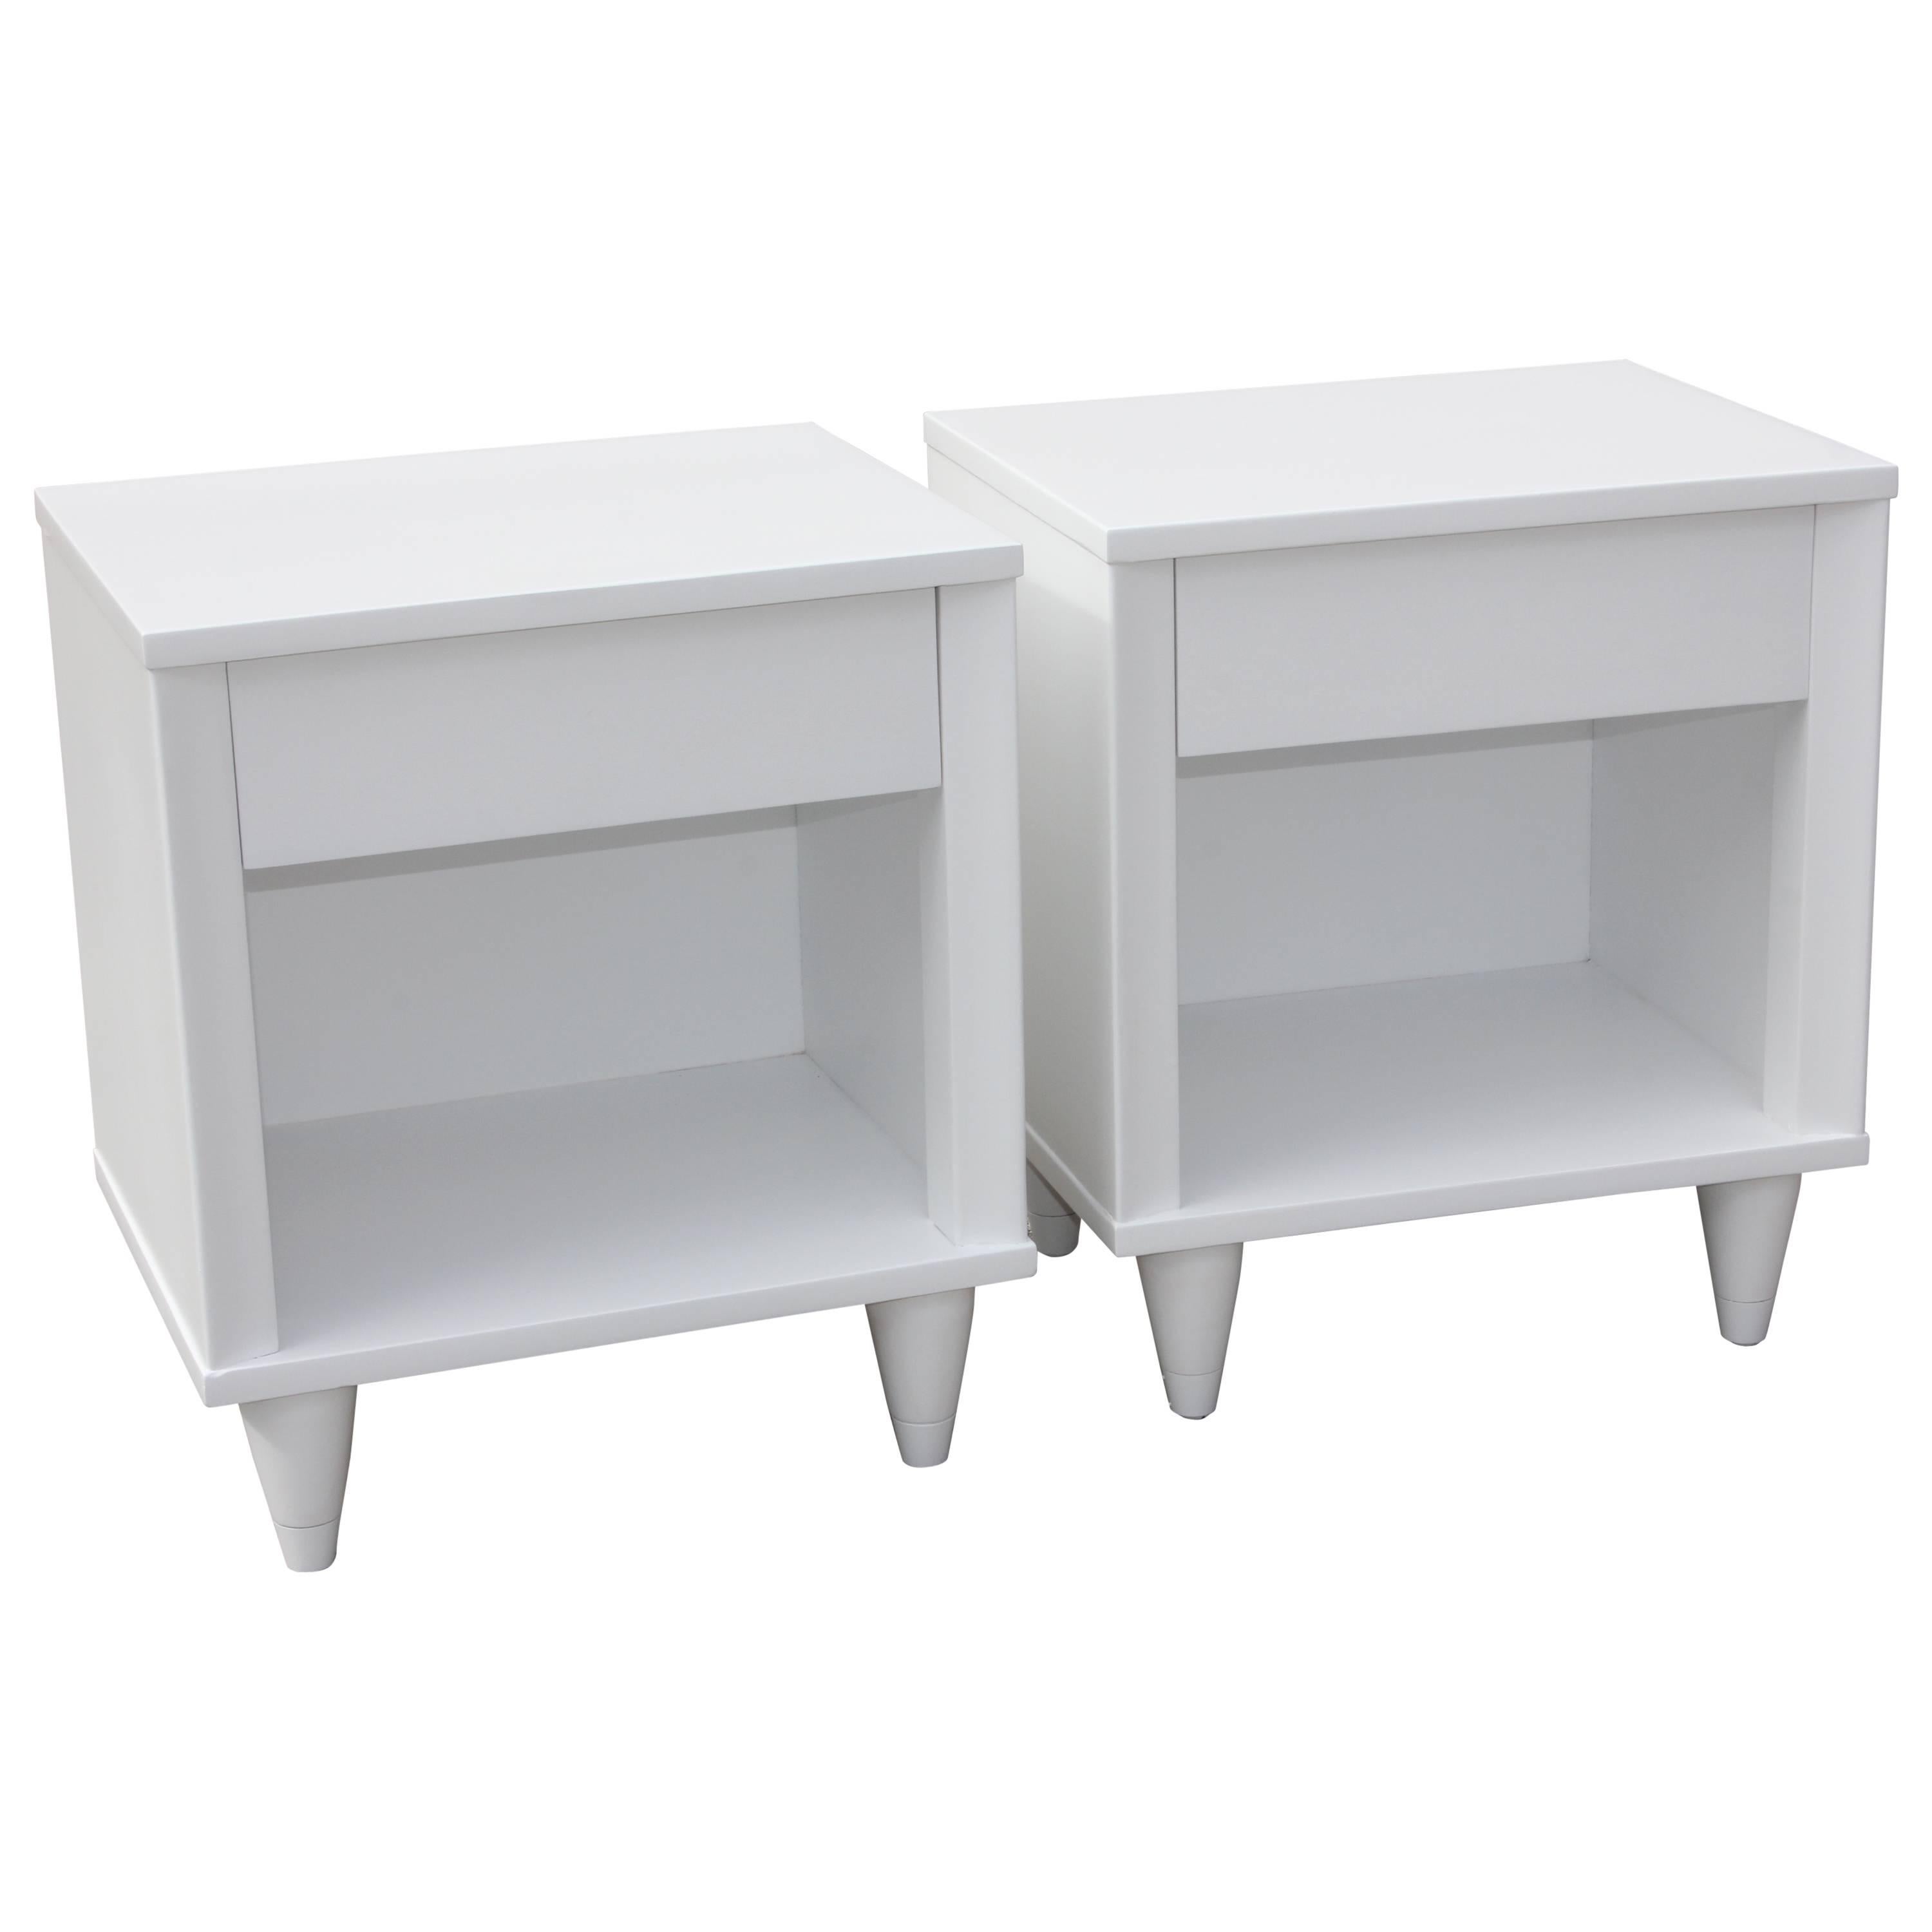 Pair of French Mid-Century Modern Snow White Nightstands, circa 1950s